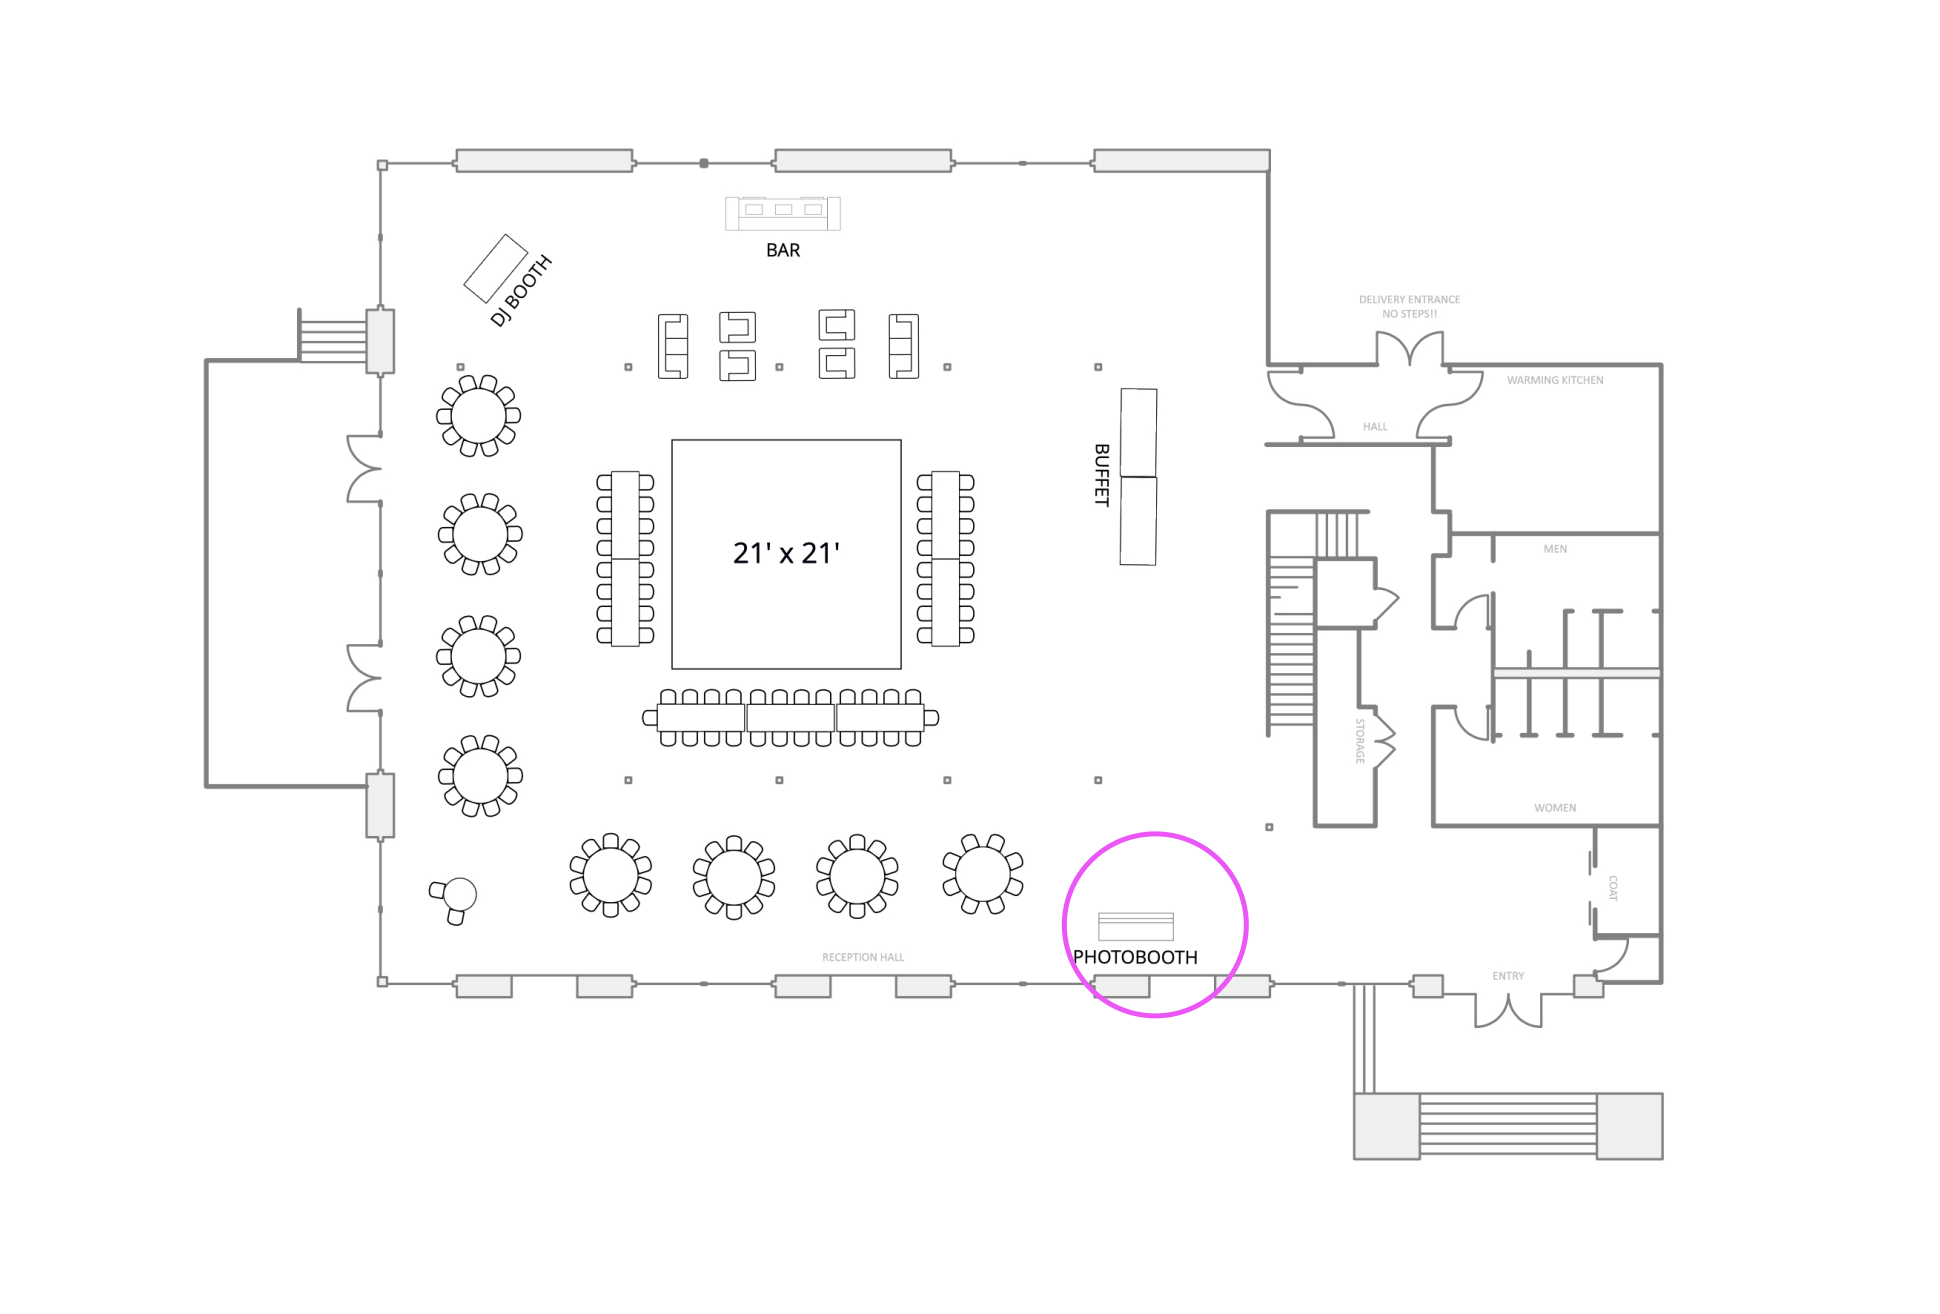 This is layout view of Osage House. You see where all of the tables are placed for wedding guests, where the photo booth will be, where the DJ will be, and more